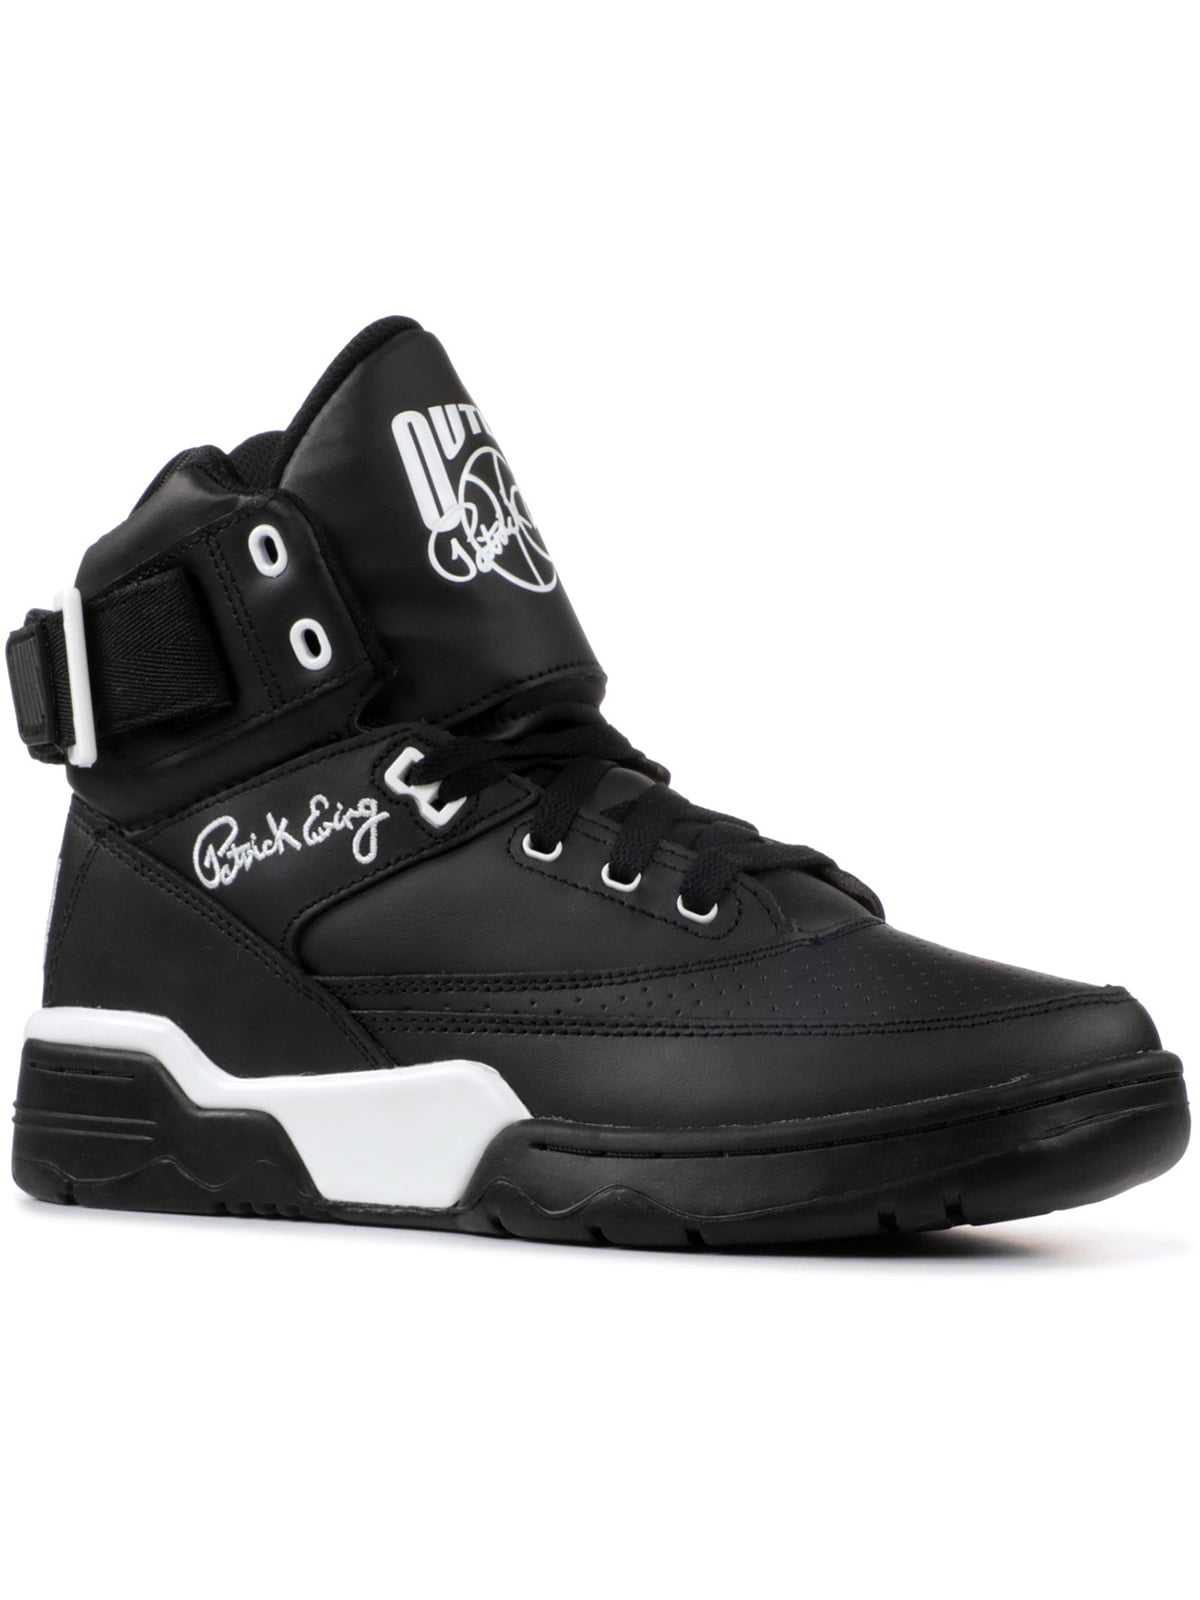 patrick ewing shoes black and white